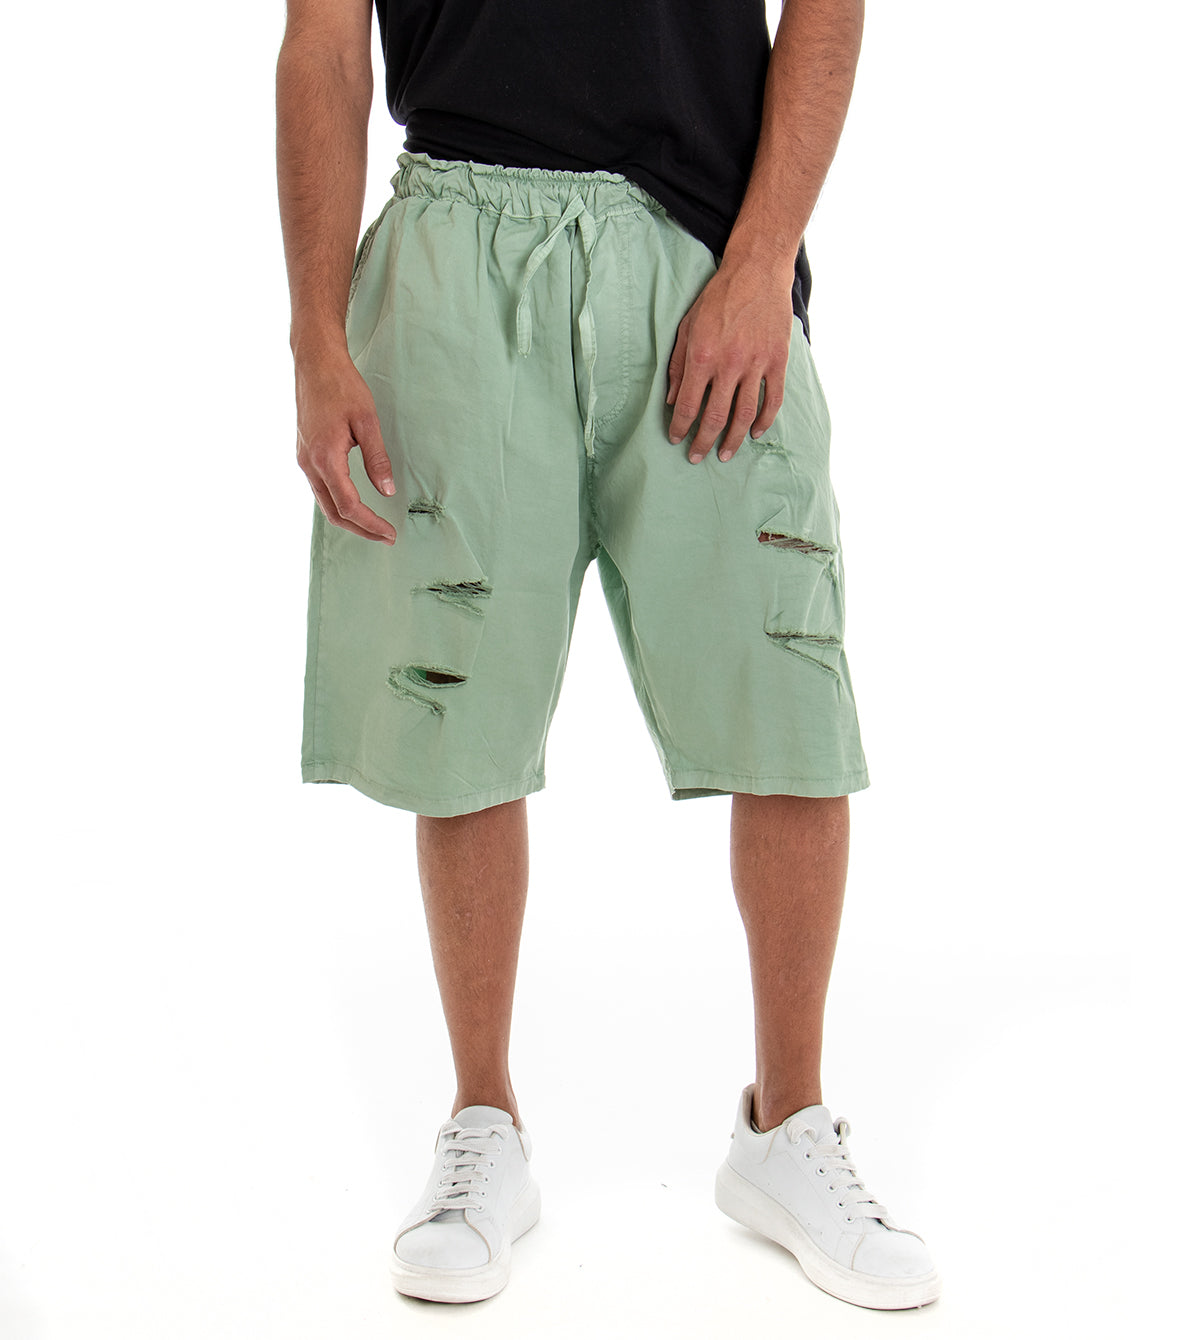 Bermuda Shorts Men's Shorts Over Solid Color Green Breaks GIOSAL-PC1531A